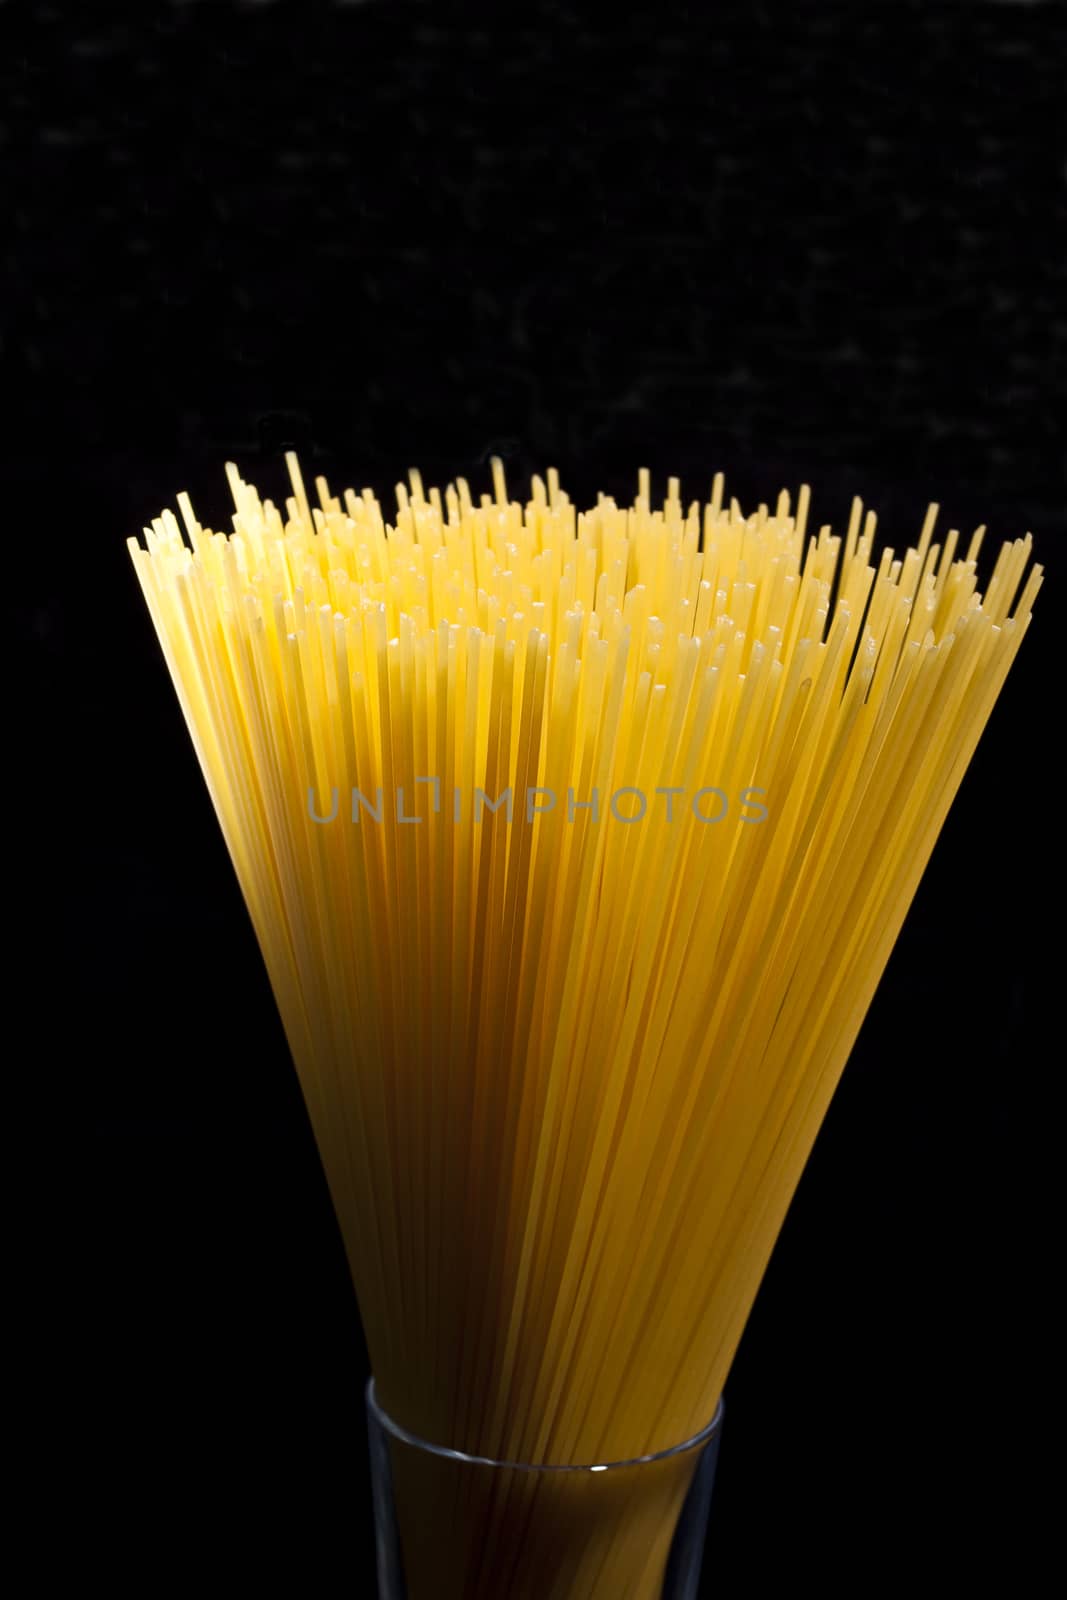 spaghetti in a glass abstrack light in black background